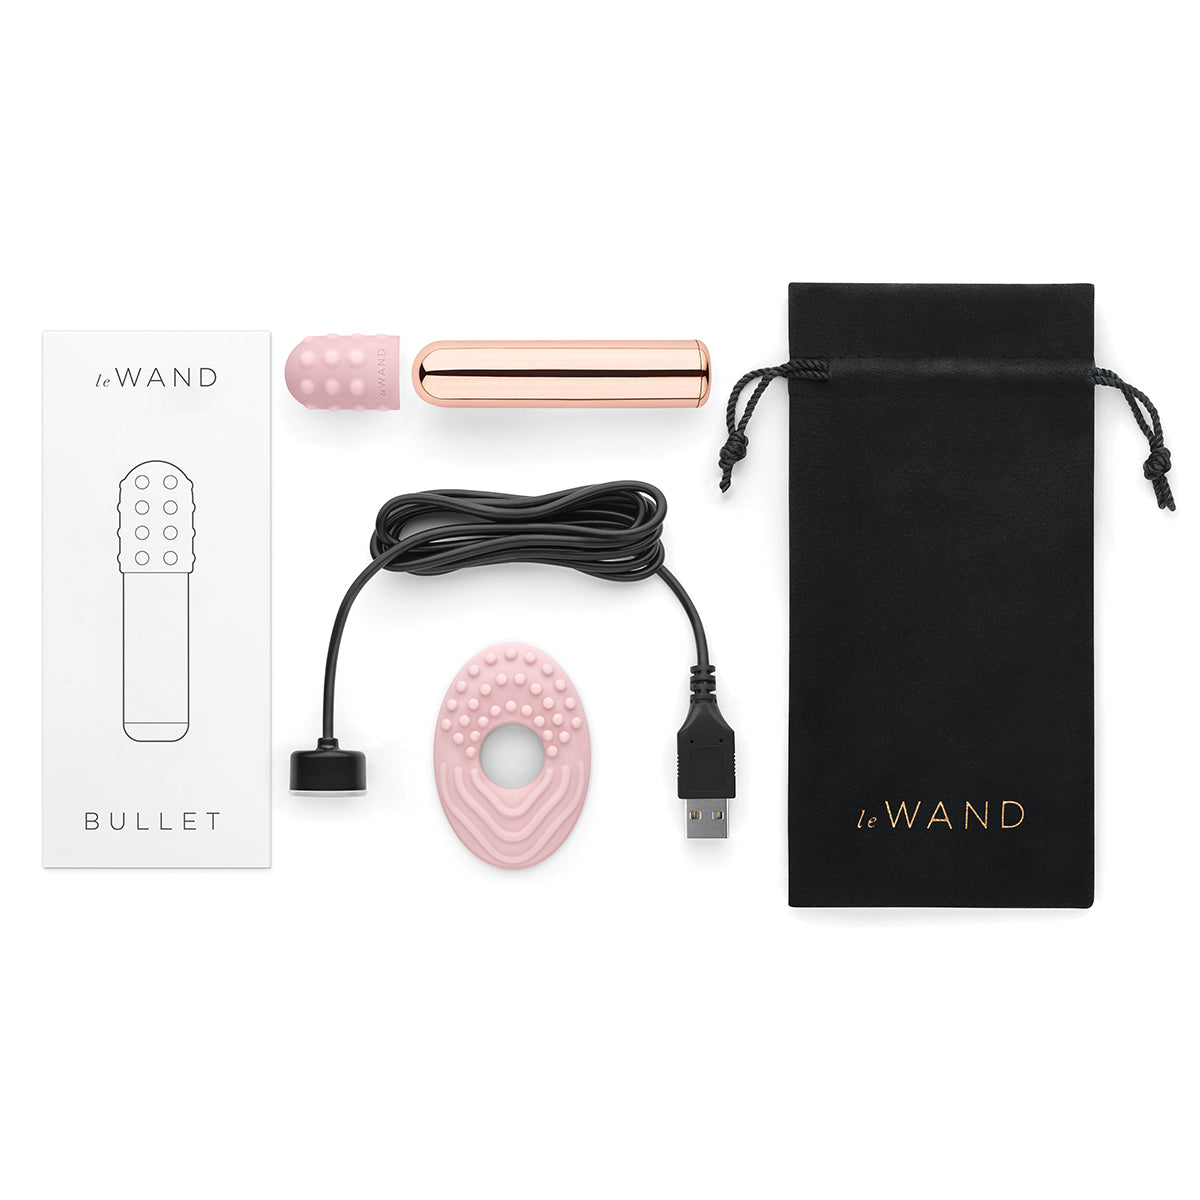 Le Wand Chrome Bullet - Rose Gold Intimates Adult Boutique